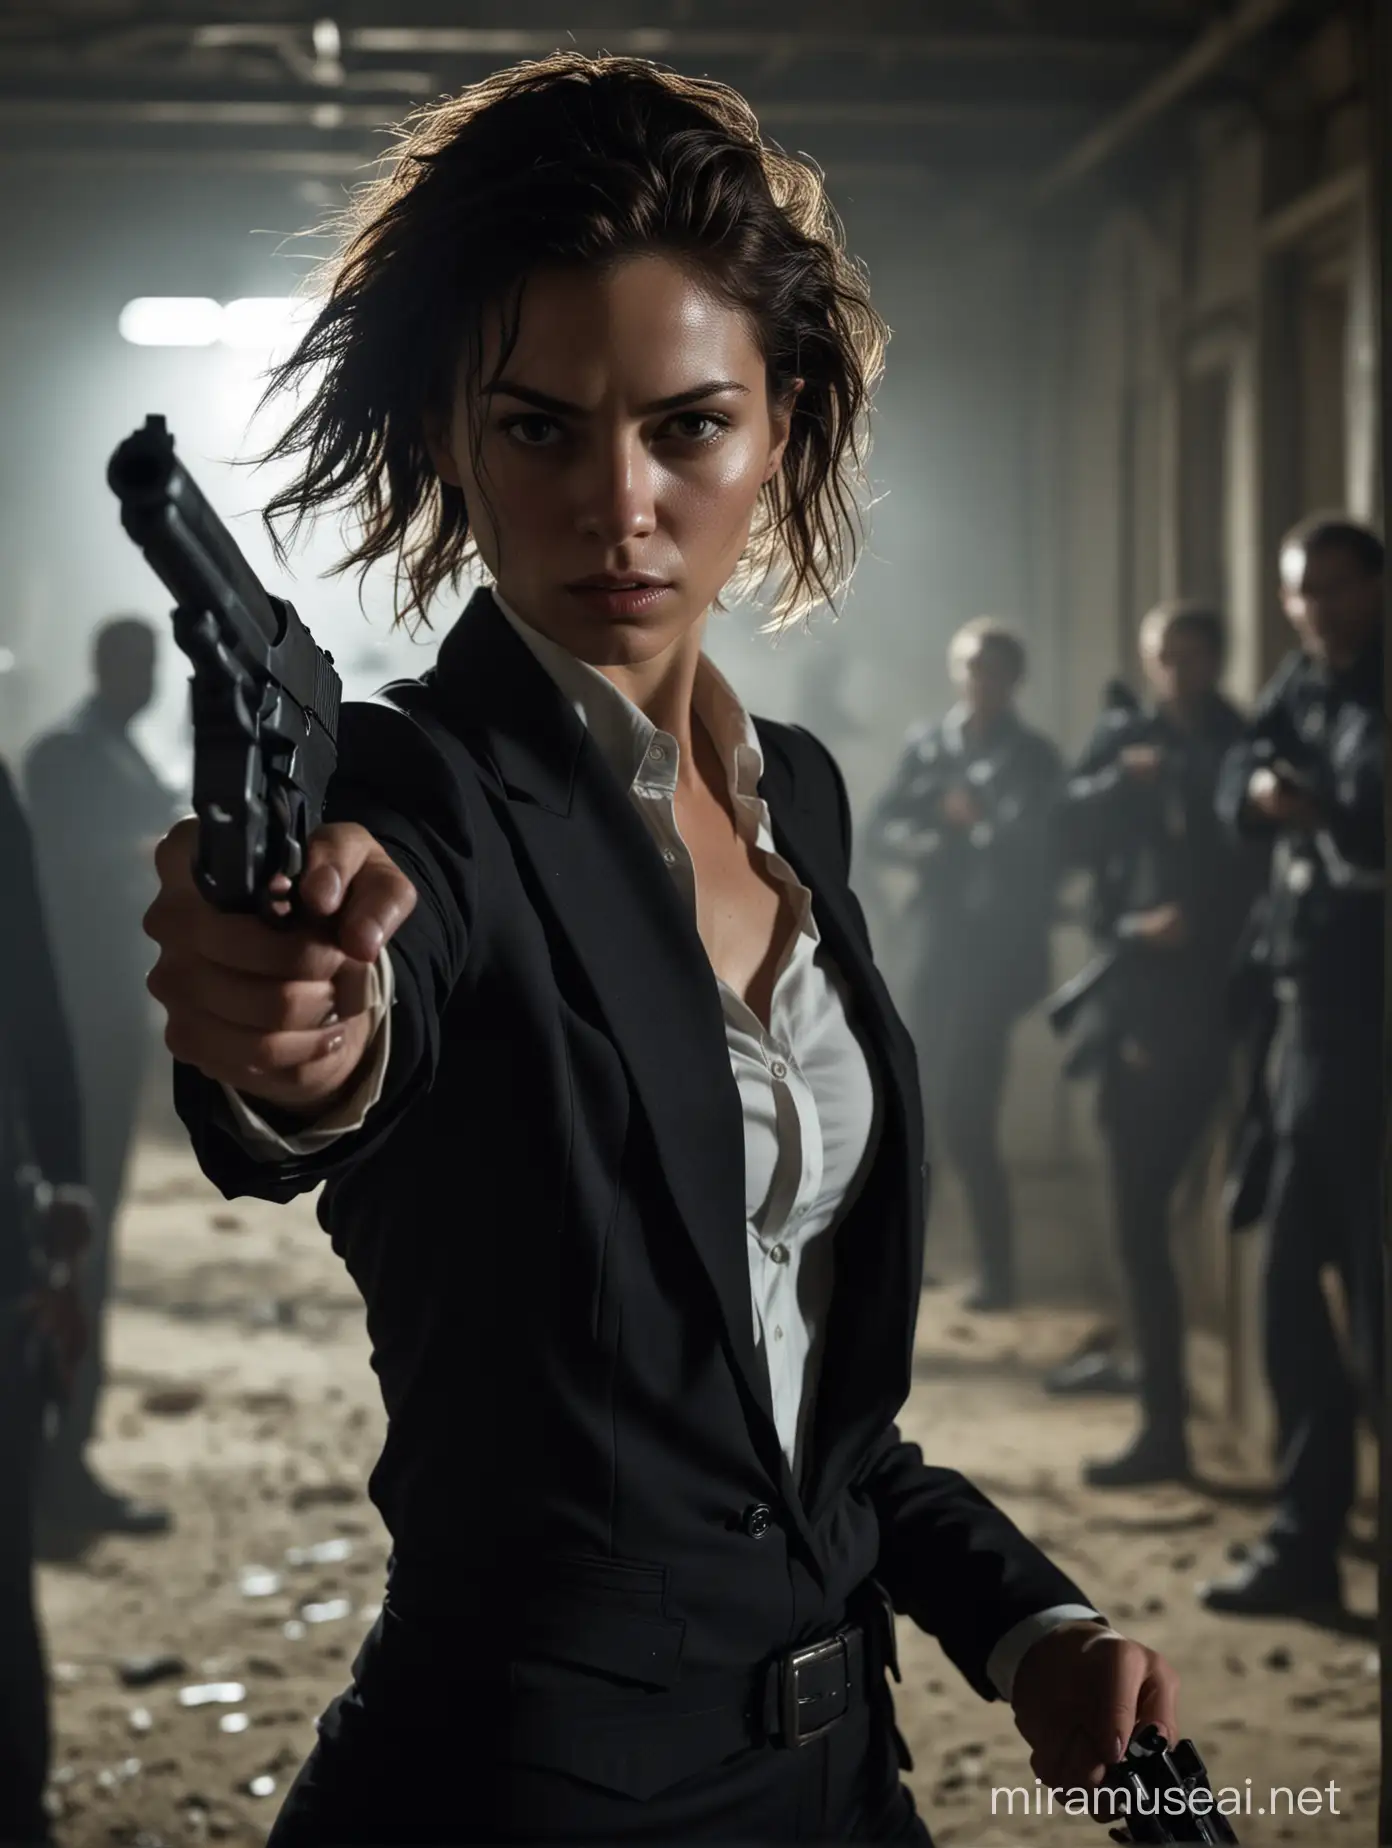 an bright image of a central 25 year old carribean character caught in a high-stakes moment, surrounded by numerous arms stretching from the shadows, each holding a sleek, menacing firearm. The female character stands resilient, with a determined gaze that confronts the danger head-on. her face is marked by the trials he's faced – a streak of simulated blood running down one side, and her hair tousled. she wears a dark suit that speaks of a grim elegance. The background is dimly lit, with an emphasis on the hands and guns converging towards her, creating a sense of tension and impending action. Capture the mood with sharp contrasts and a focused light source to highlight the facial expression and the steel of the guns --ar 4:3 --s 450 --v 6.0